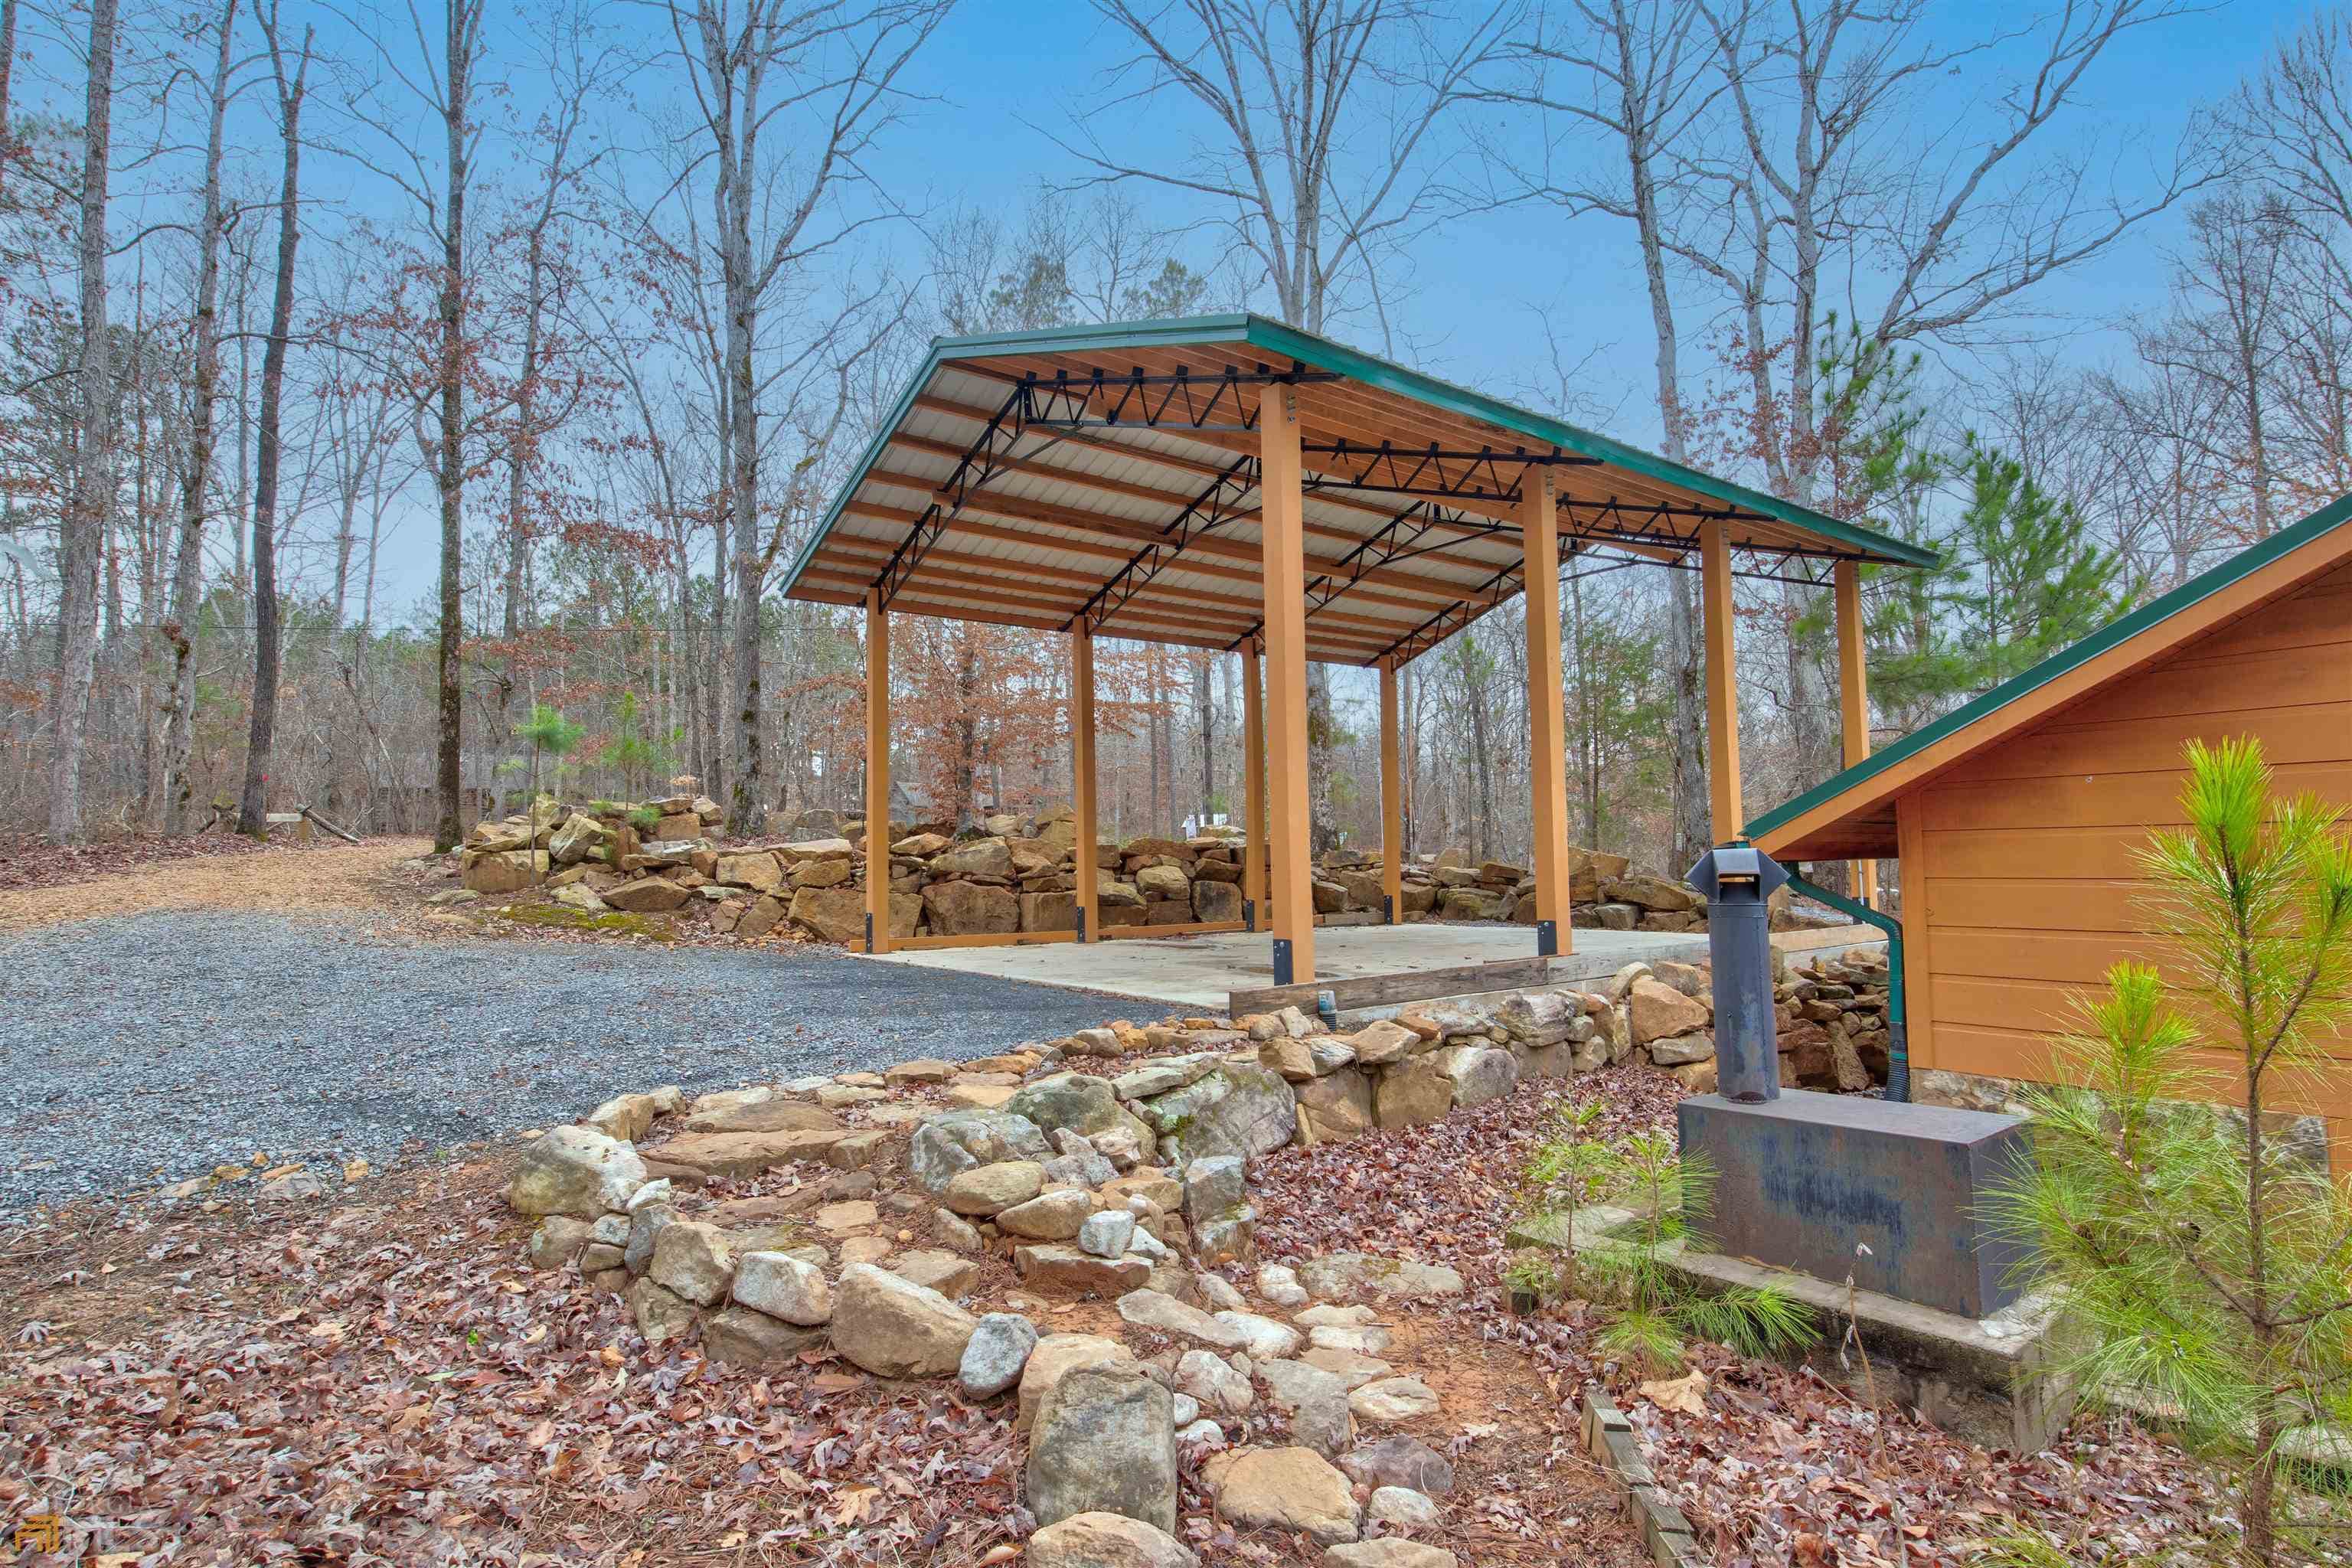 Camper submitted image from River Ranch at Summerville, GA - 1.5 hours from Atlanta, GA - 1